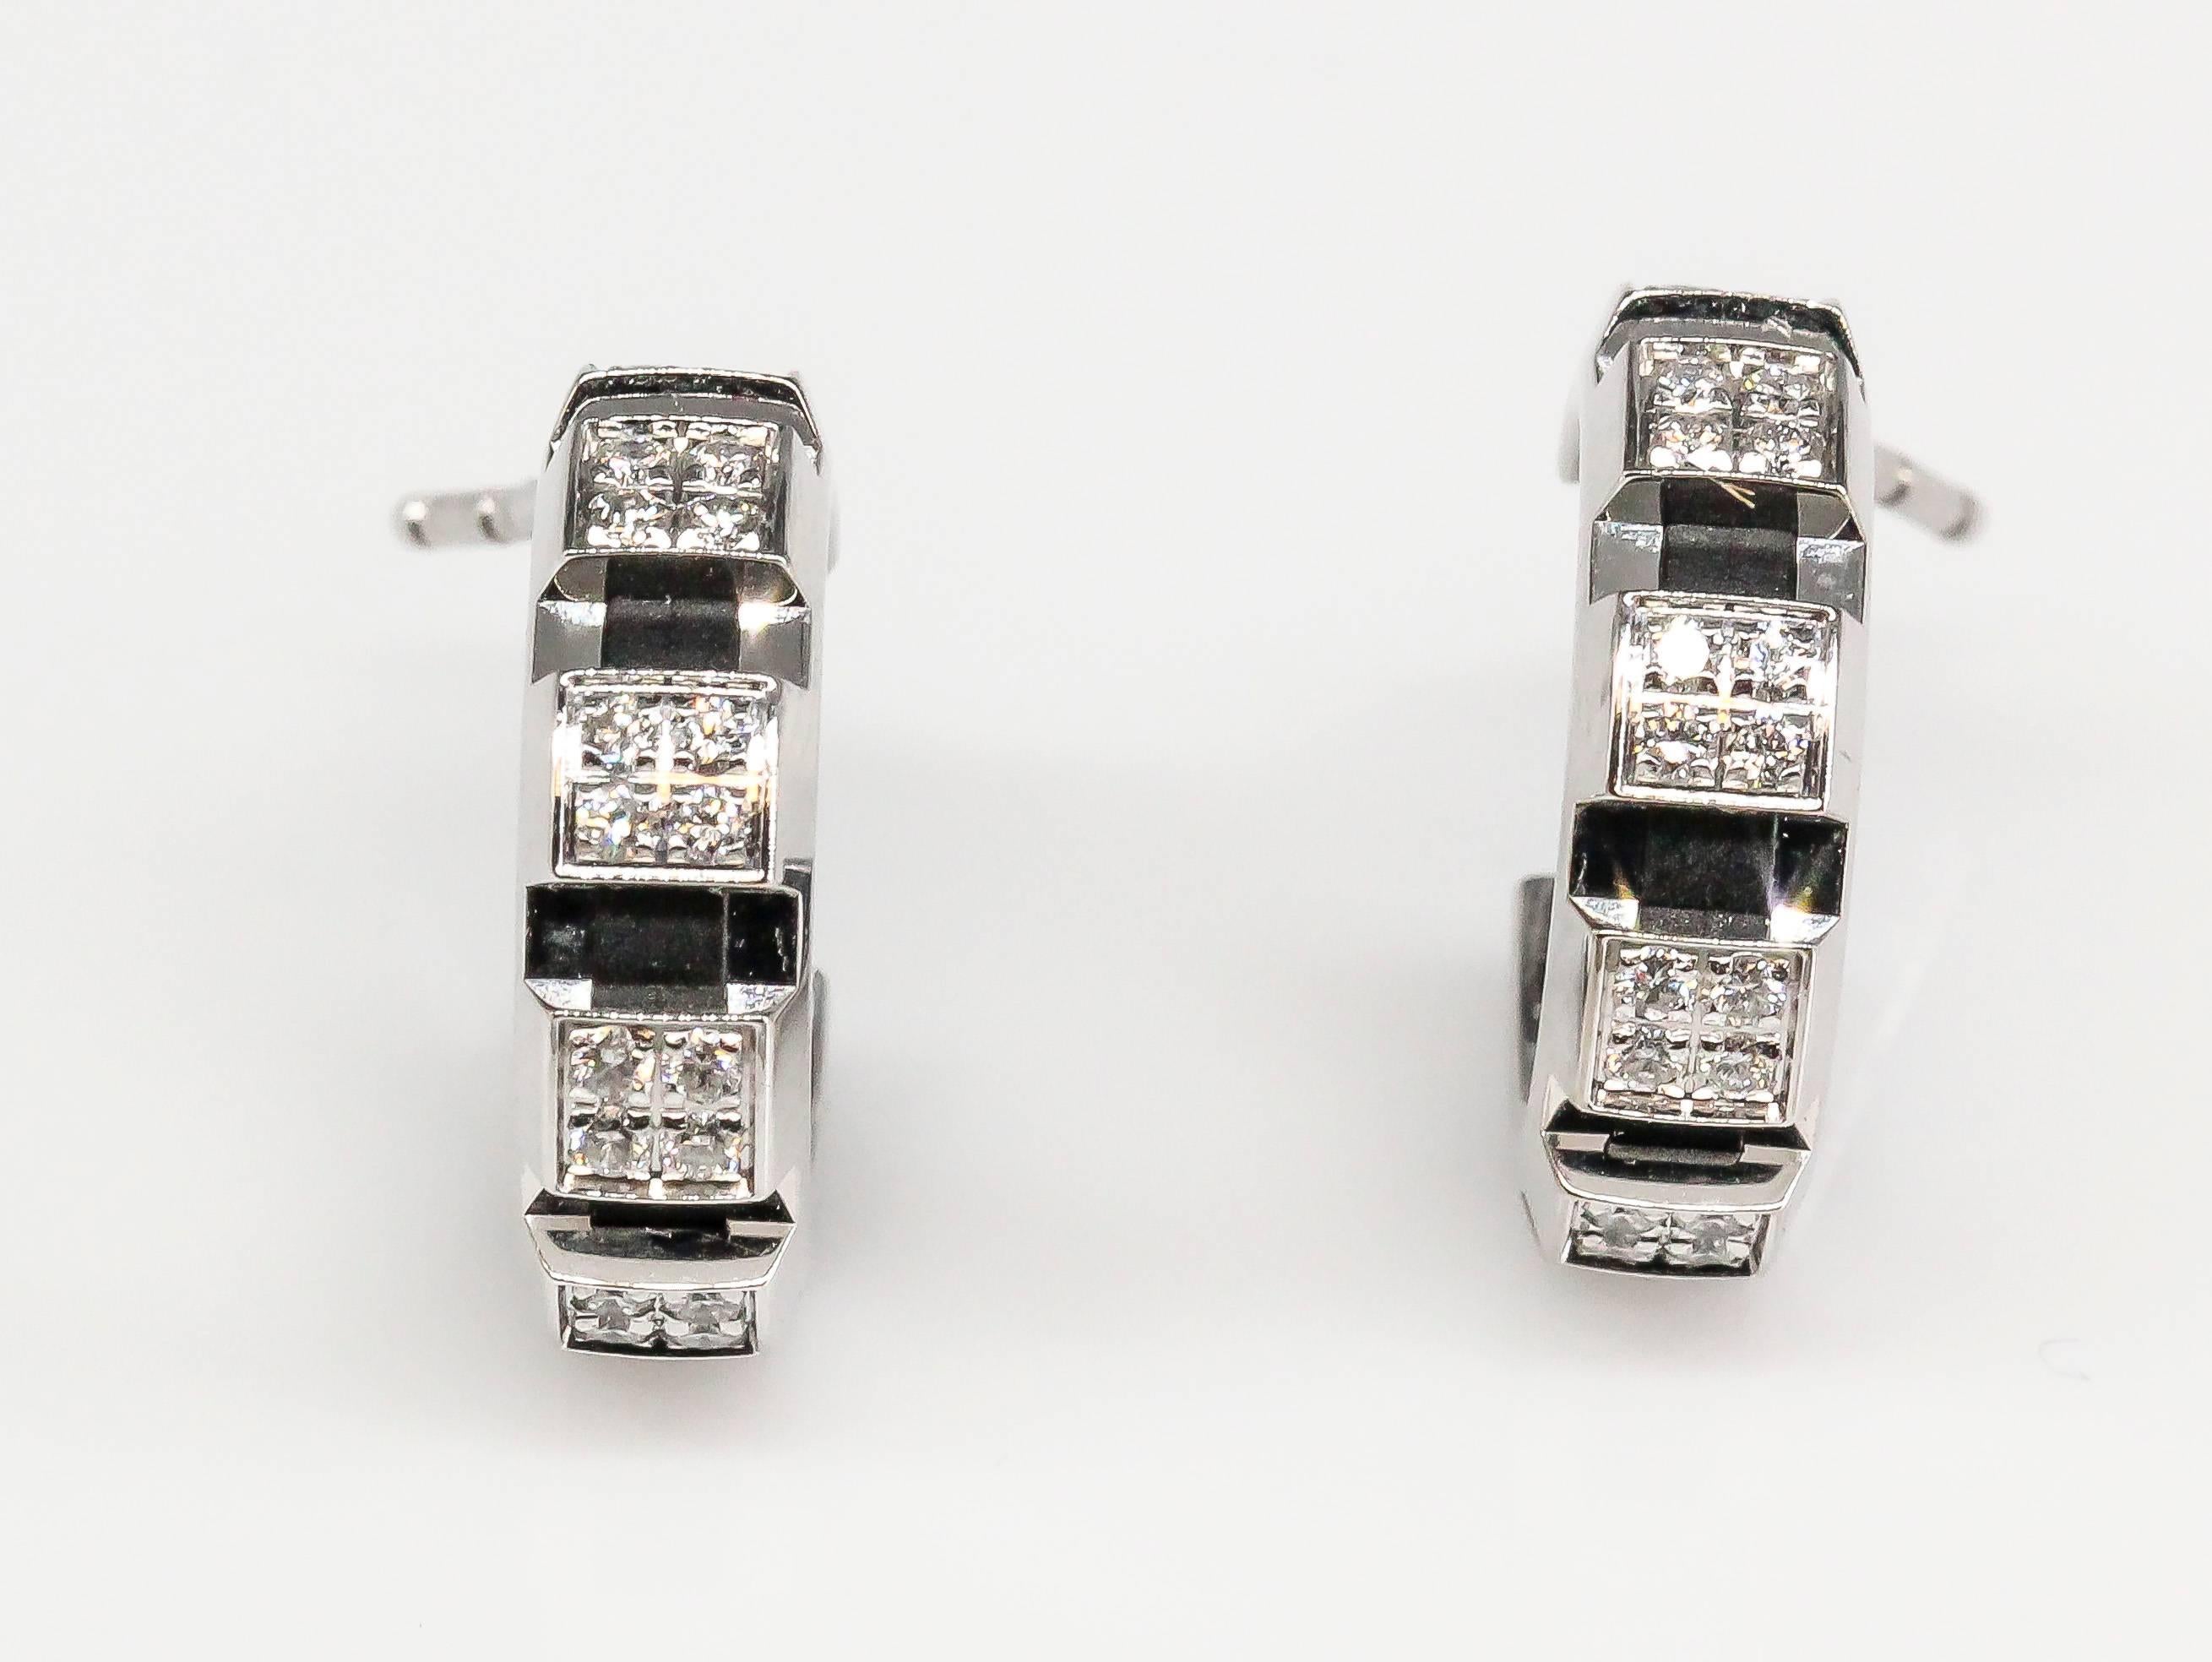 Classic diamond and 18K white gold hoop earrings by Chaumet. This charming set features high grade round brilliant cut diamonds set on an 18K white gold hoop setting. Beautifully made and highly wearable.

Hallmarks: Chaumet, 750, reference numbers.